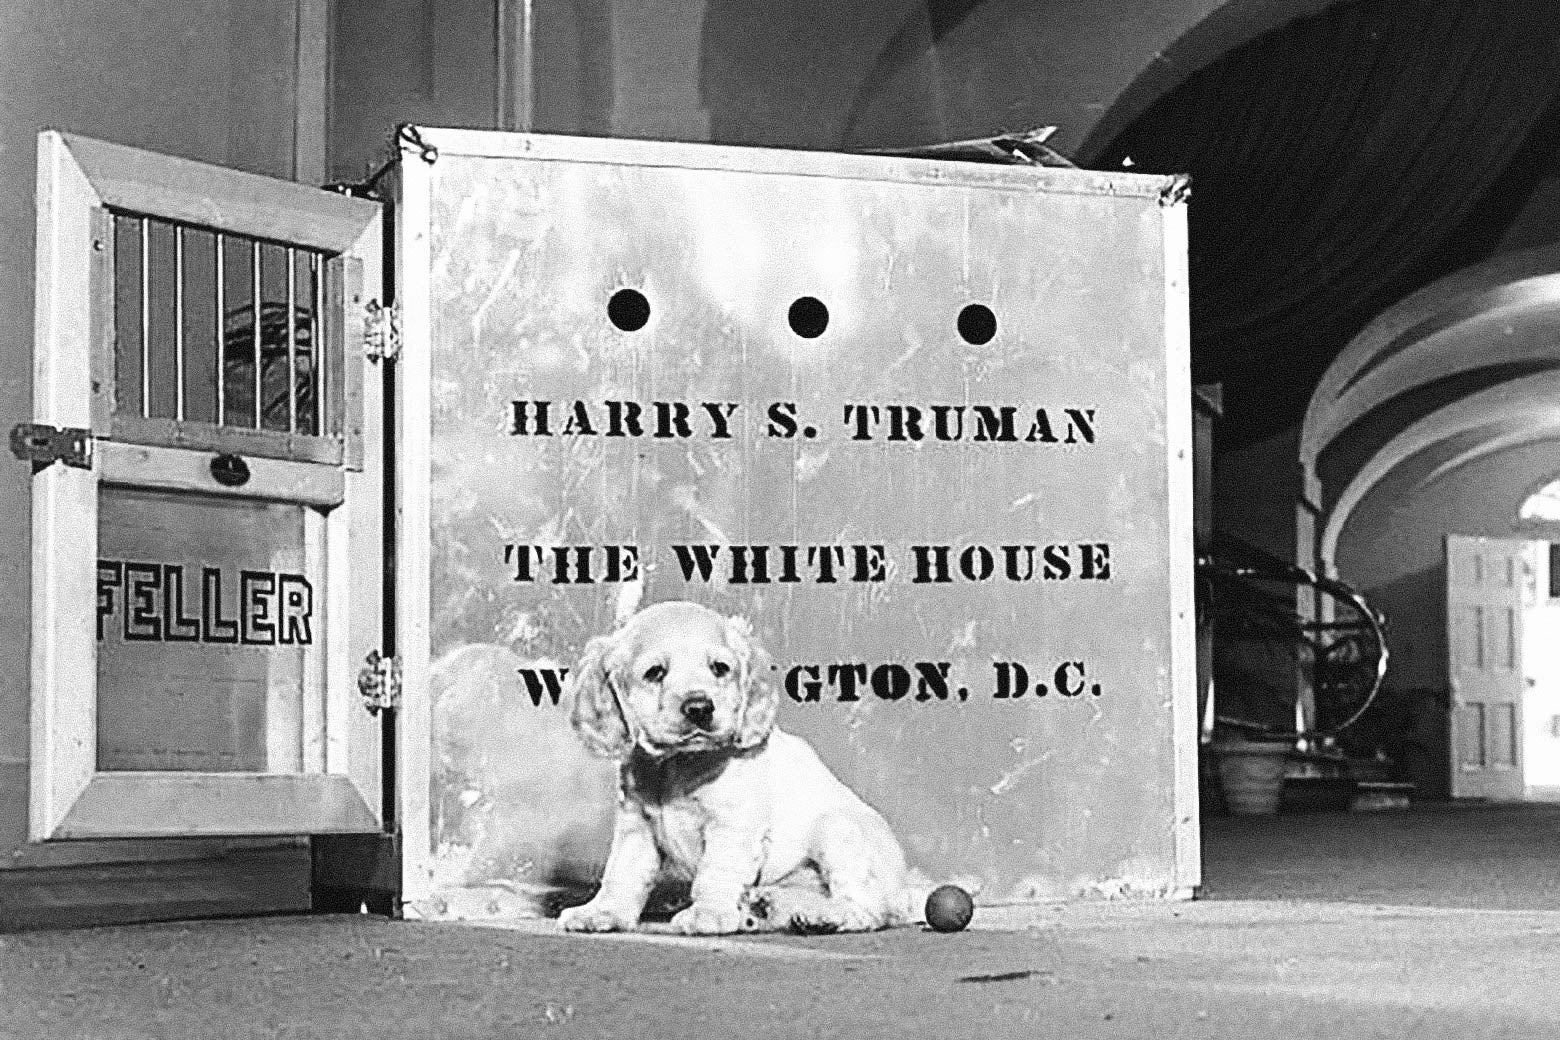 A cocker spaniel puppy sits in front of a cage with “Harry S. Truman/The White House/Washington D.C.” written on it.